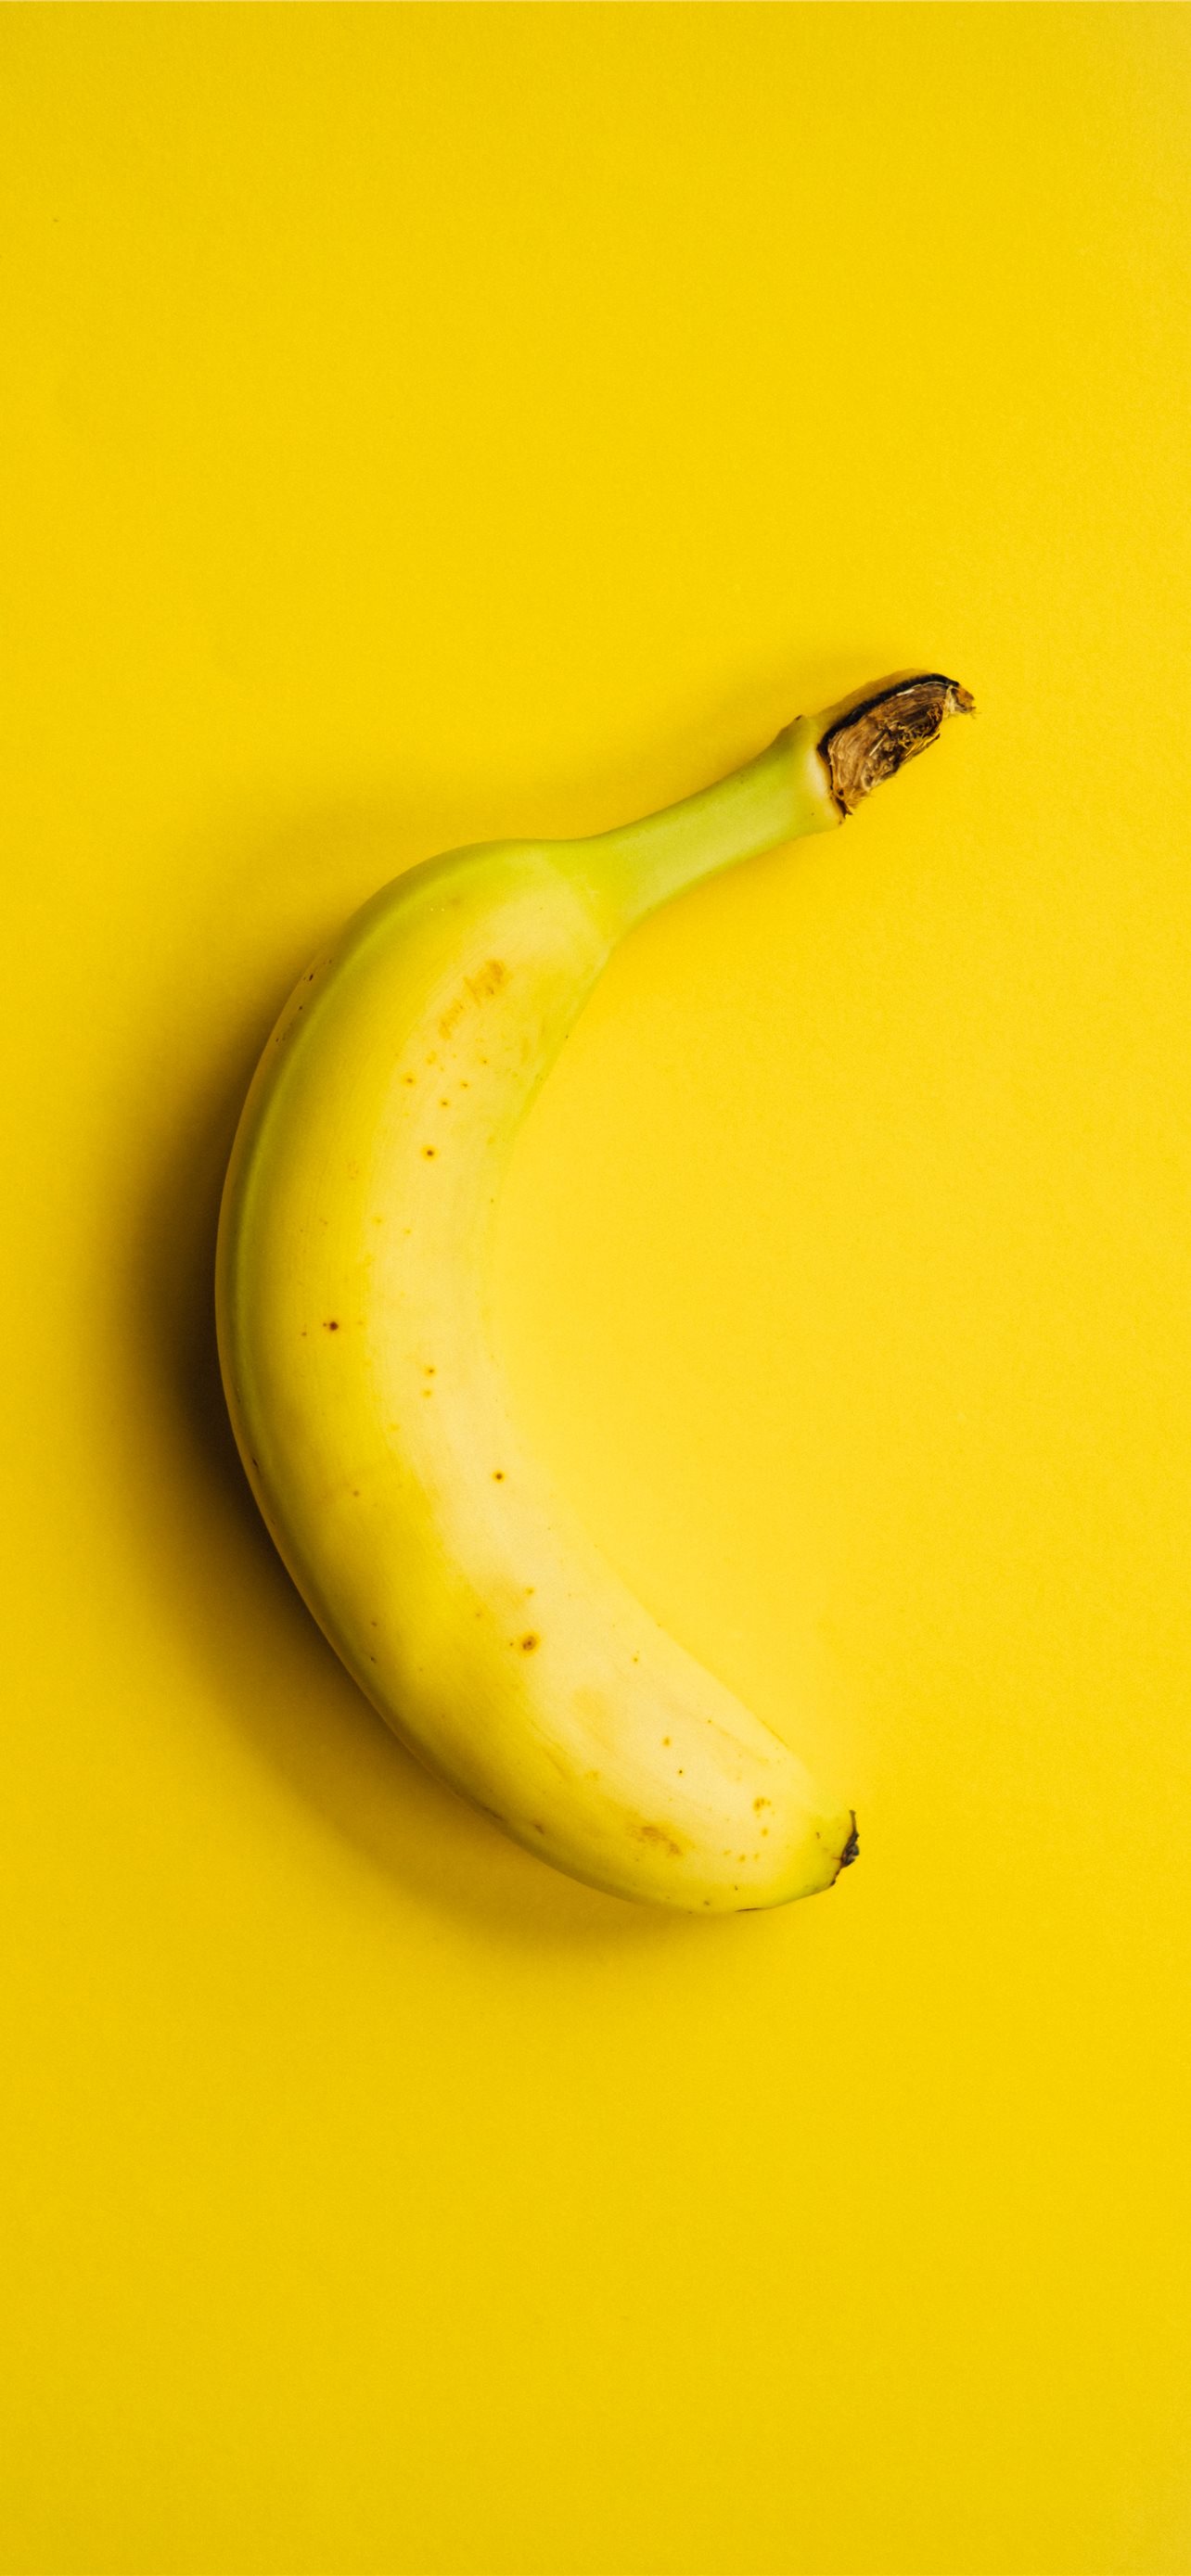 yellow banana fruit on yellow surface iPhone Wallpapers Free Download